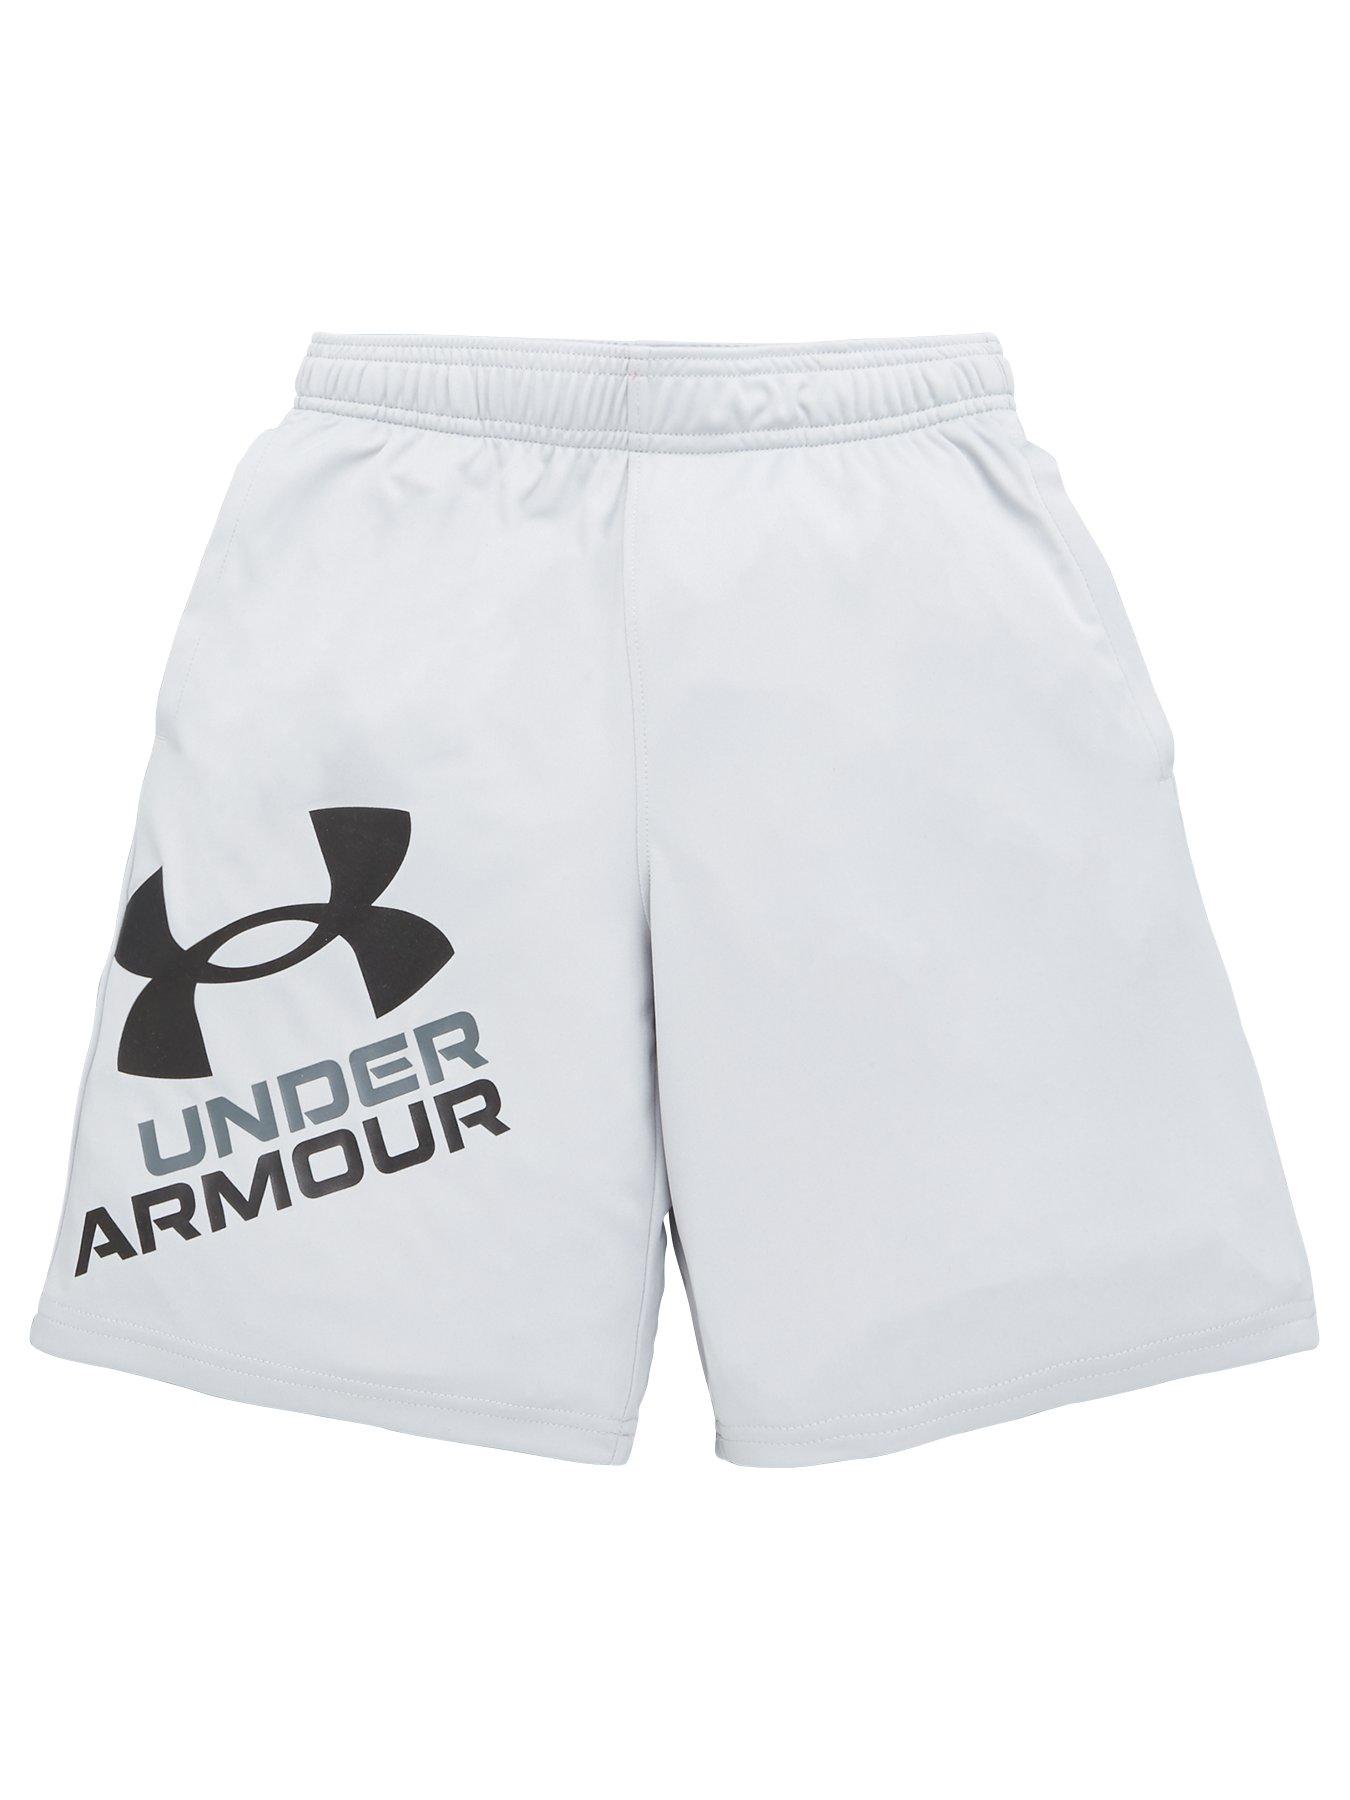 UNDER ARMOUR Boys Challenger Knit Shorts - Black/White